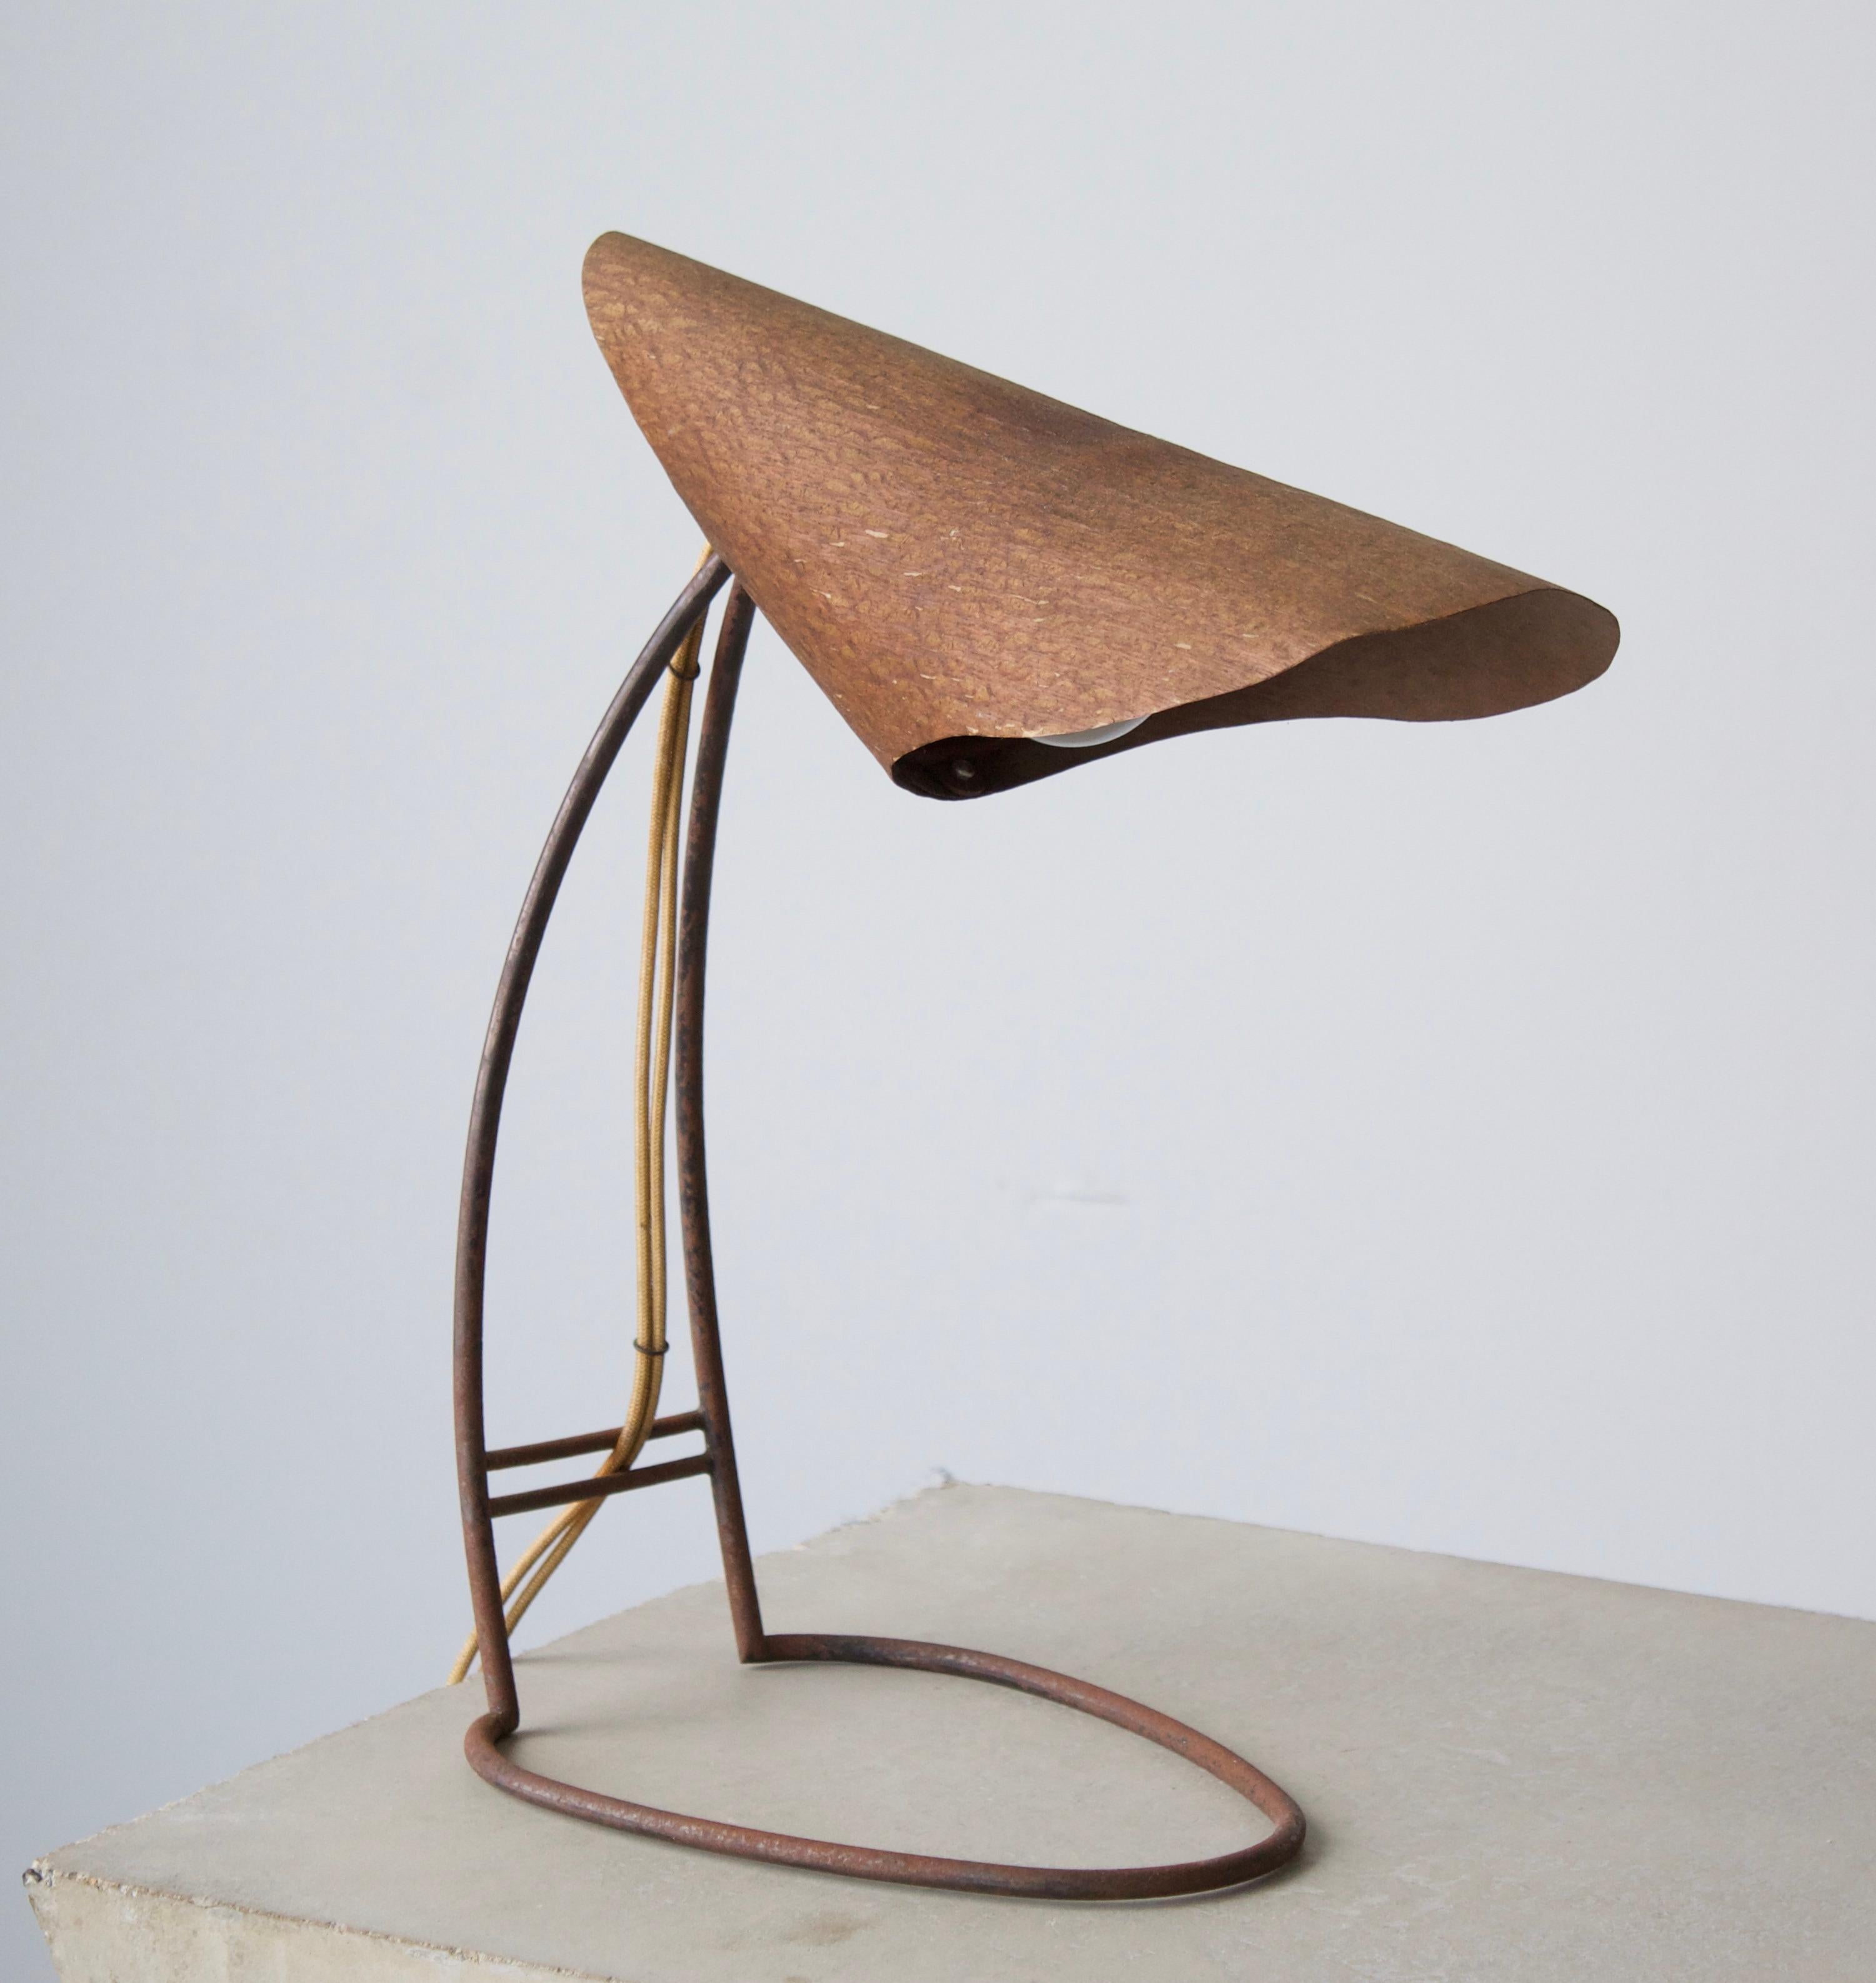 A table lamp. By unknown studio craftsman.

Other designers of the period include Alexandre Knoll, George Nakashima. Isamu Noguchi, J.B. Blunk and Paul Frankl.